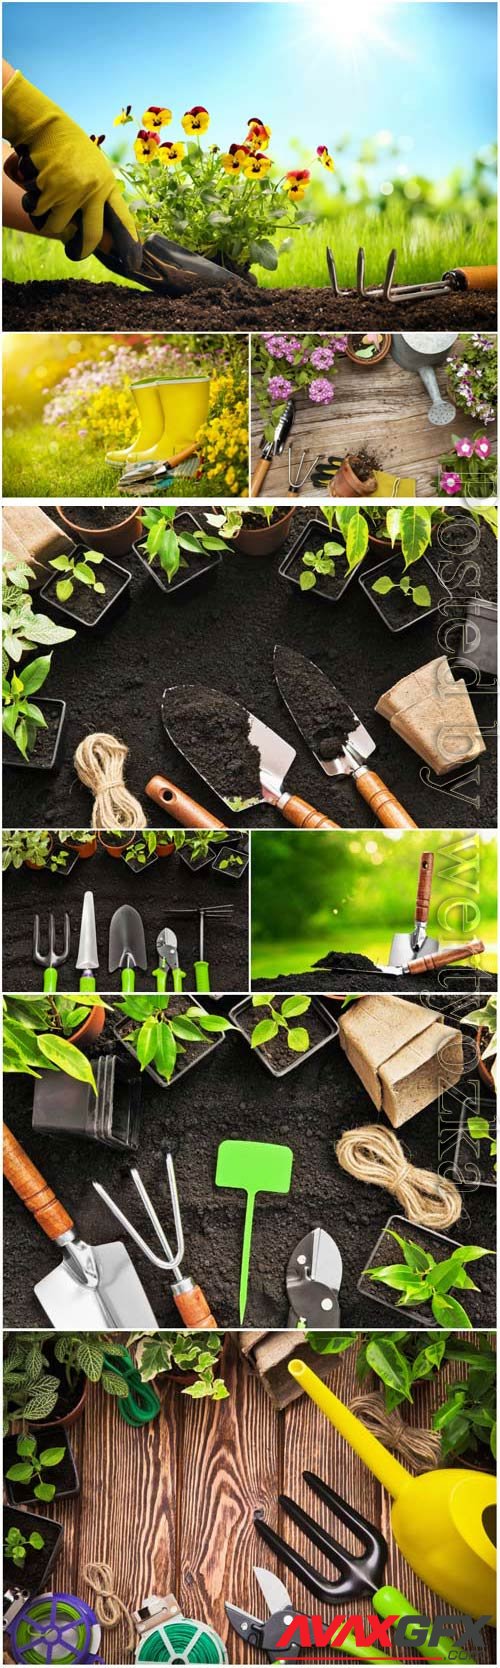 Gardening, tools to care for flowers and trees stock photo